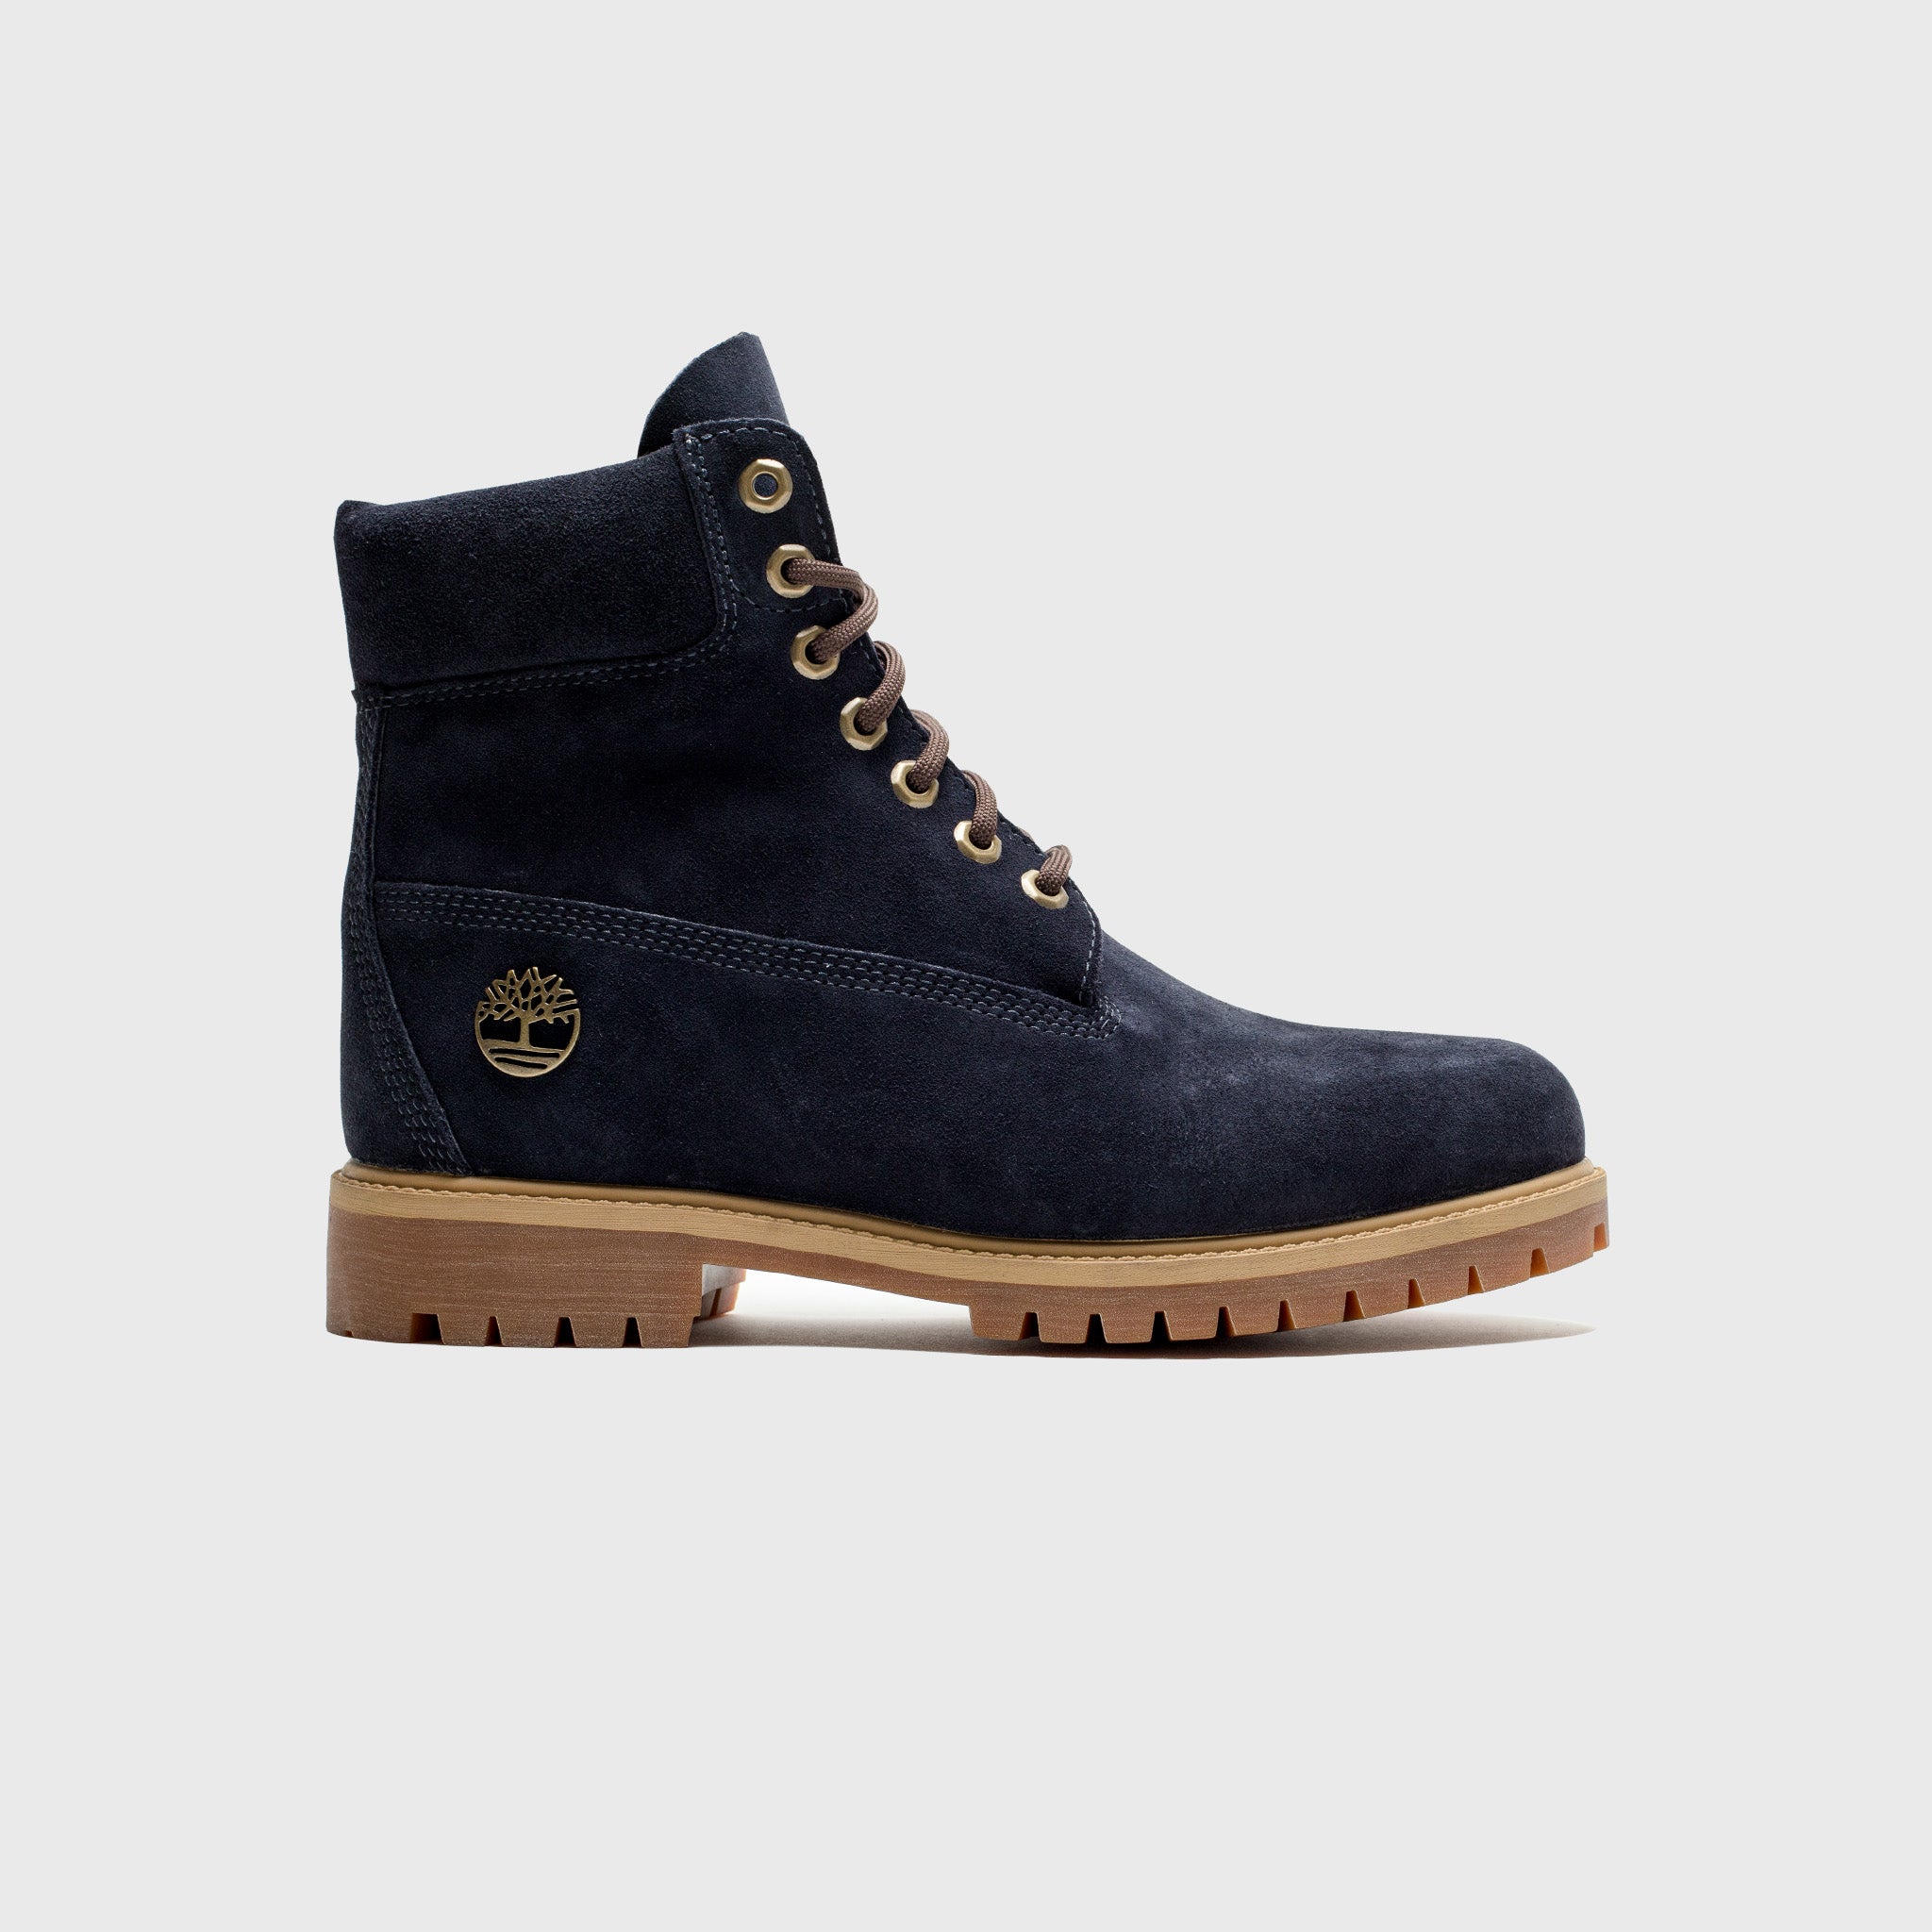 6 IN' LACE HERITAGE WATERPROOF BOOT "STEAD COLLECTION"